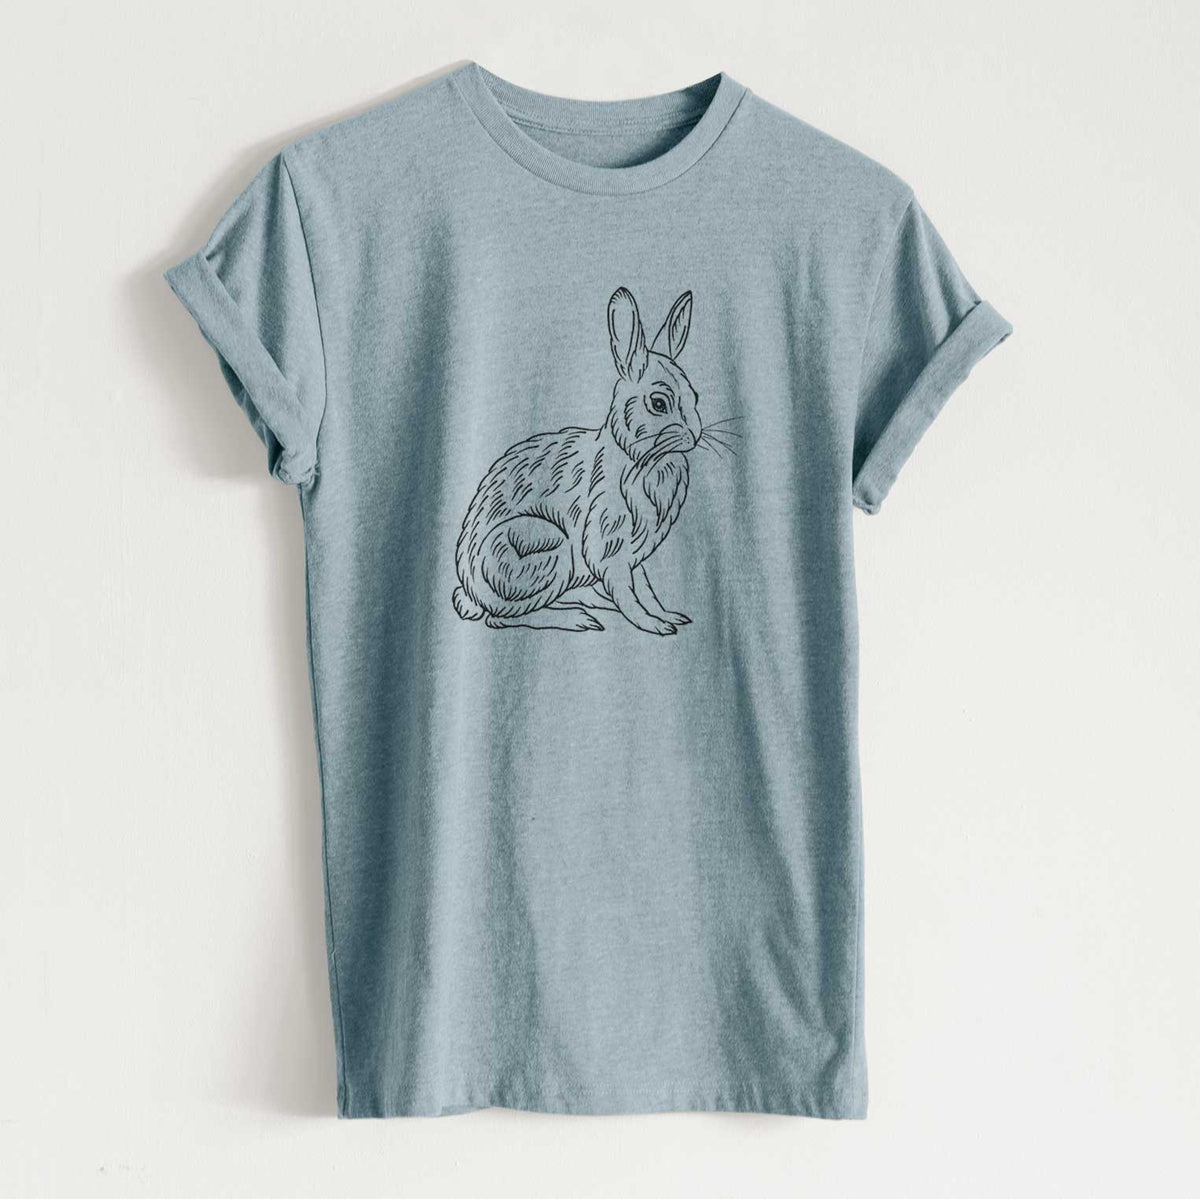 Snowshoe Hare - Unisex Recycled Eco Tee  - CLOSEOUT - FINAL SALE